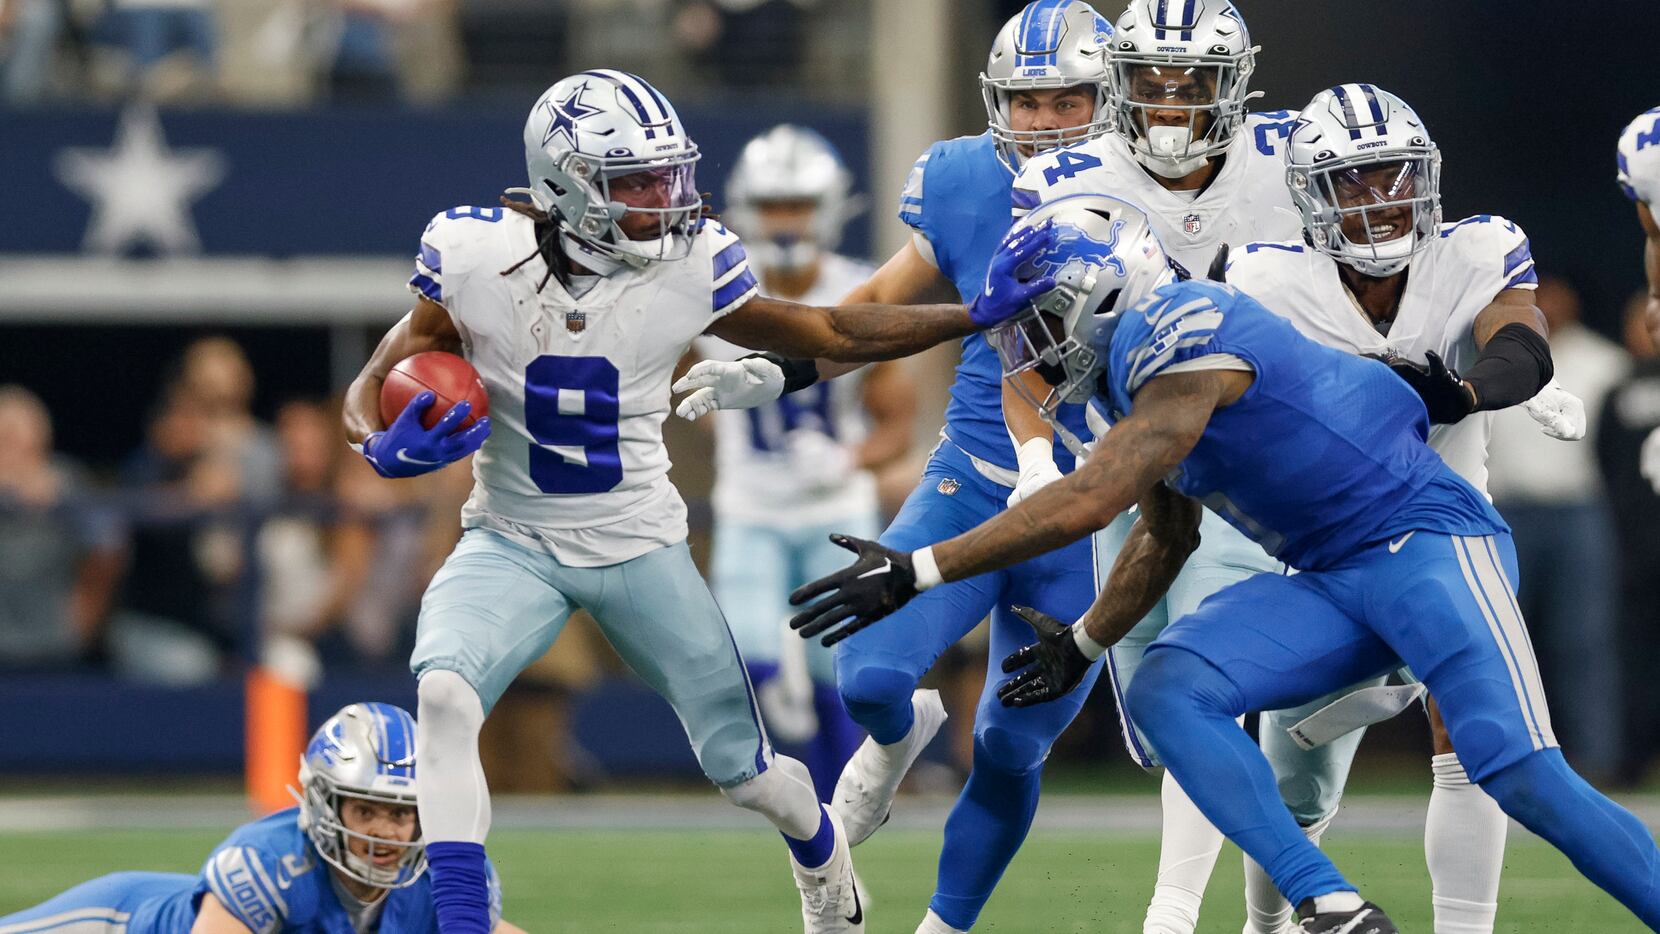 After another 'crazy' return, will Cowboys increase KaVontae